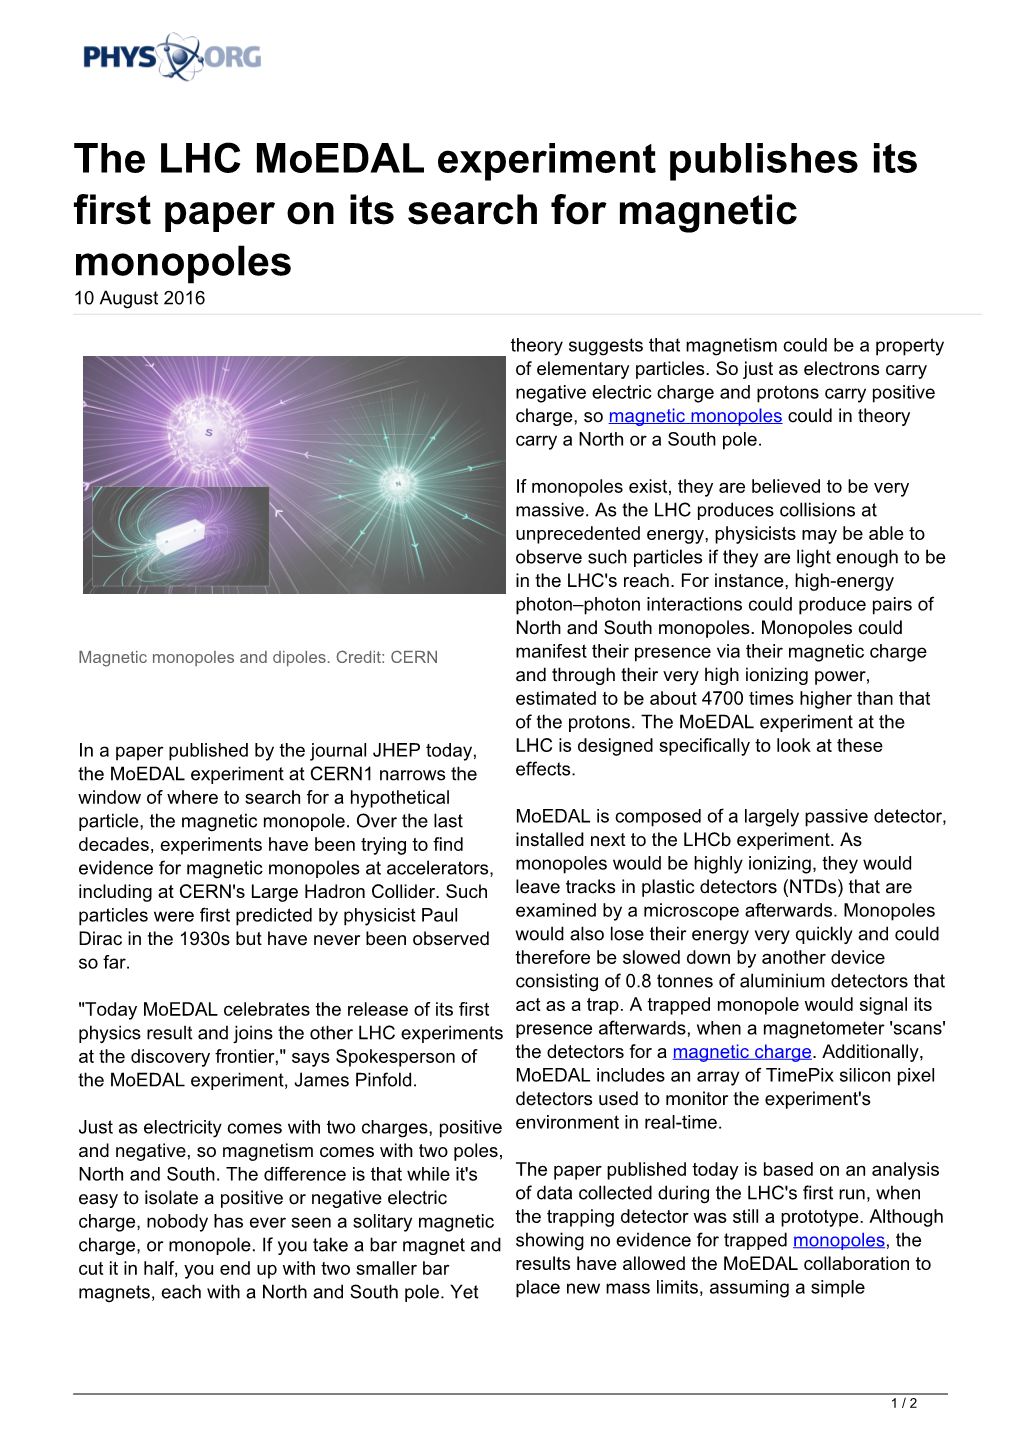 The LHC Moedal Experiment Publishes Its First Paper on Its Search for Magnetic Monopoles 10 August 2016